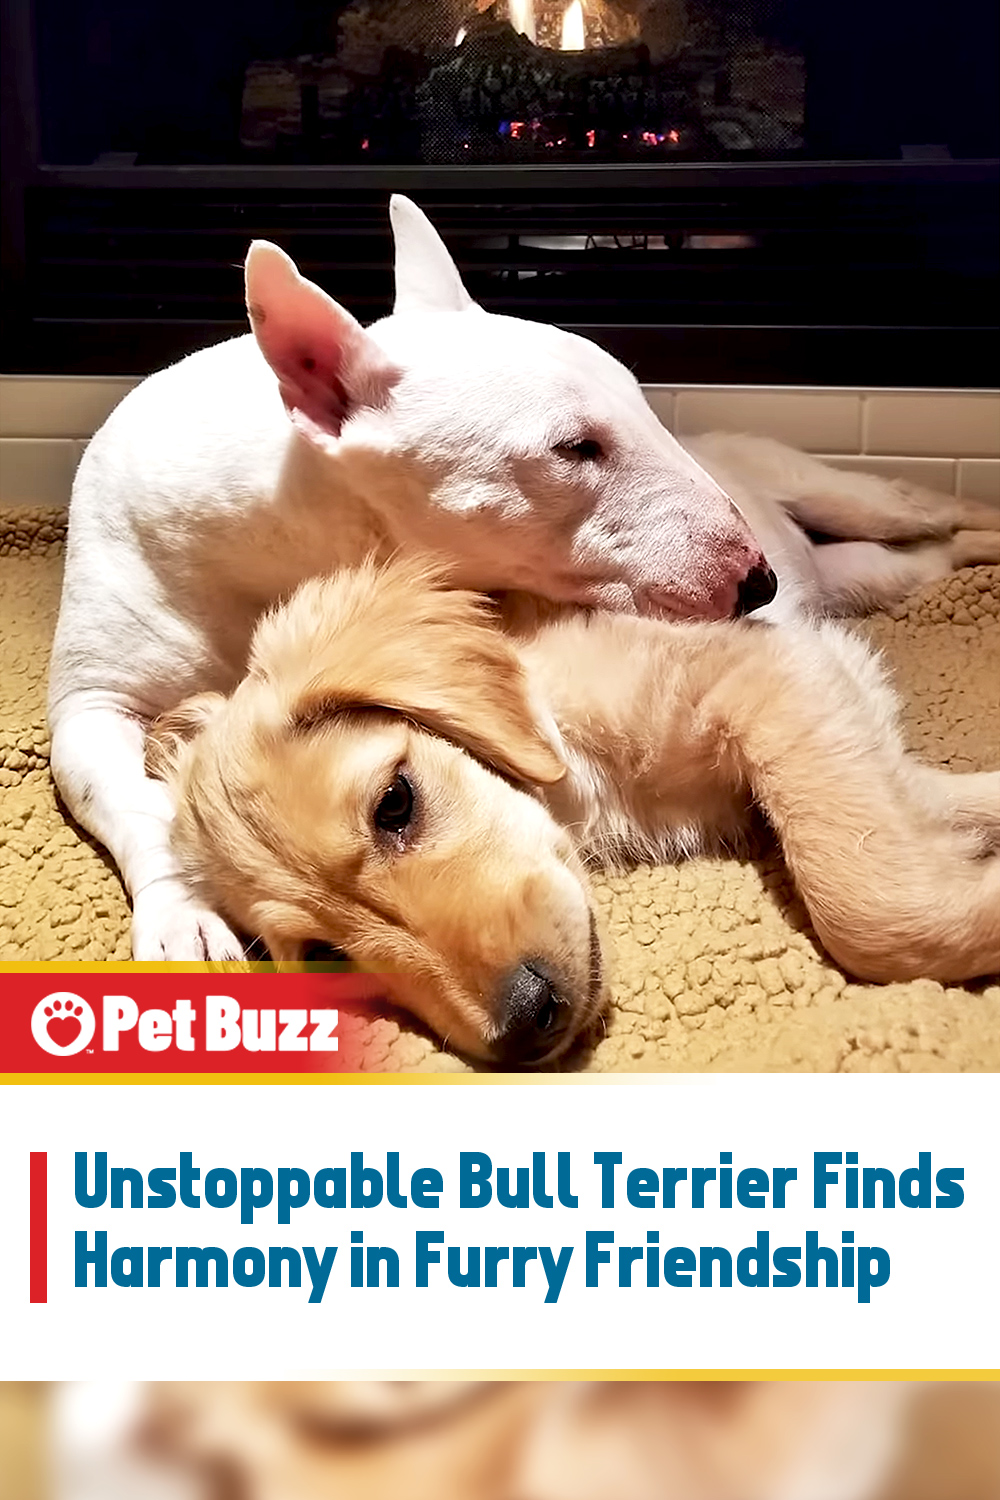 Unstoppable Bull Terrier Finds Harmony in Furry Friendship